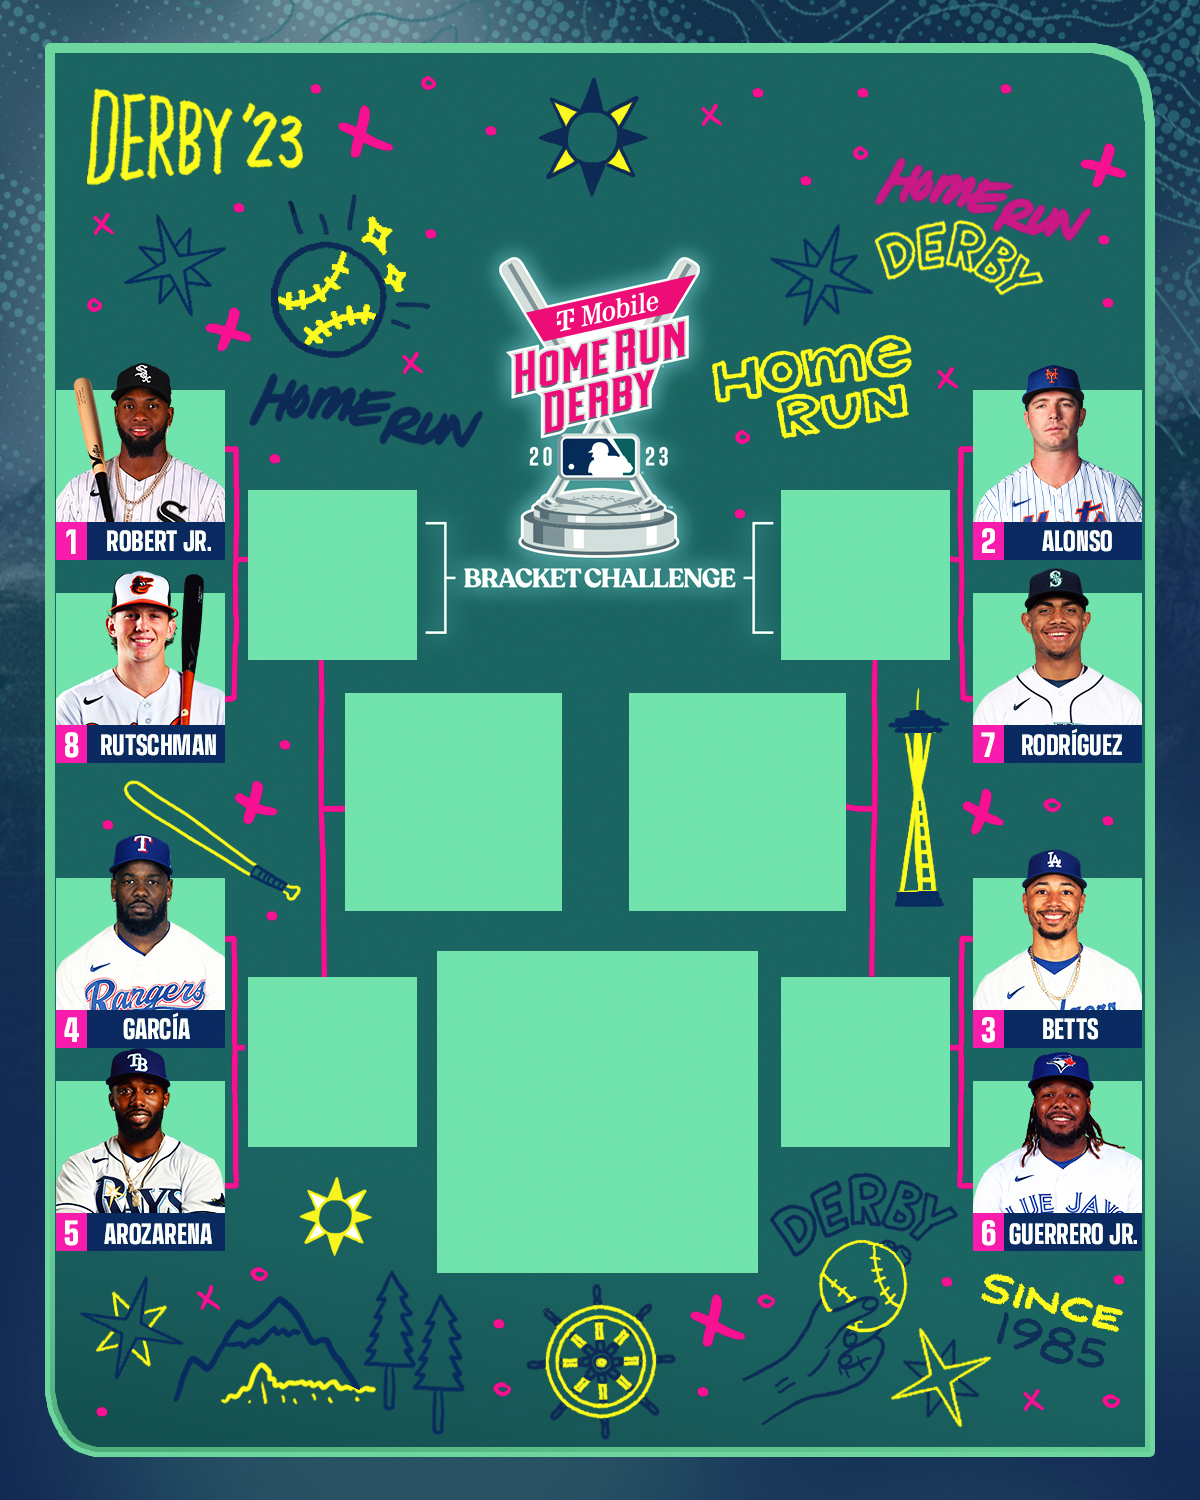 MLB  You could just watch the Derby  OR you could play the 2019 HR  Derby Bracket Challenge and win 250000 while doing it mlbcombracket   Facebook